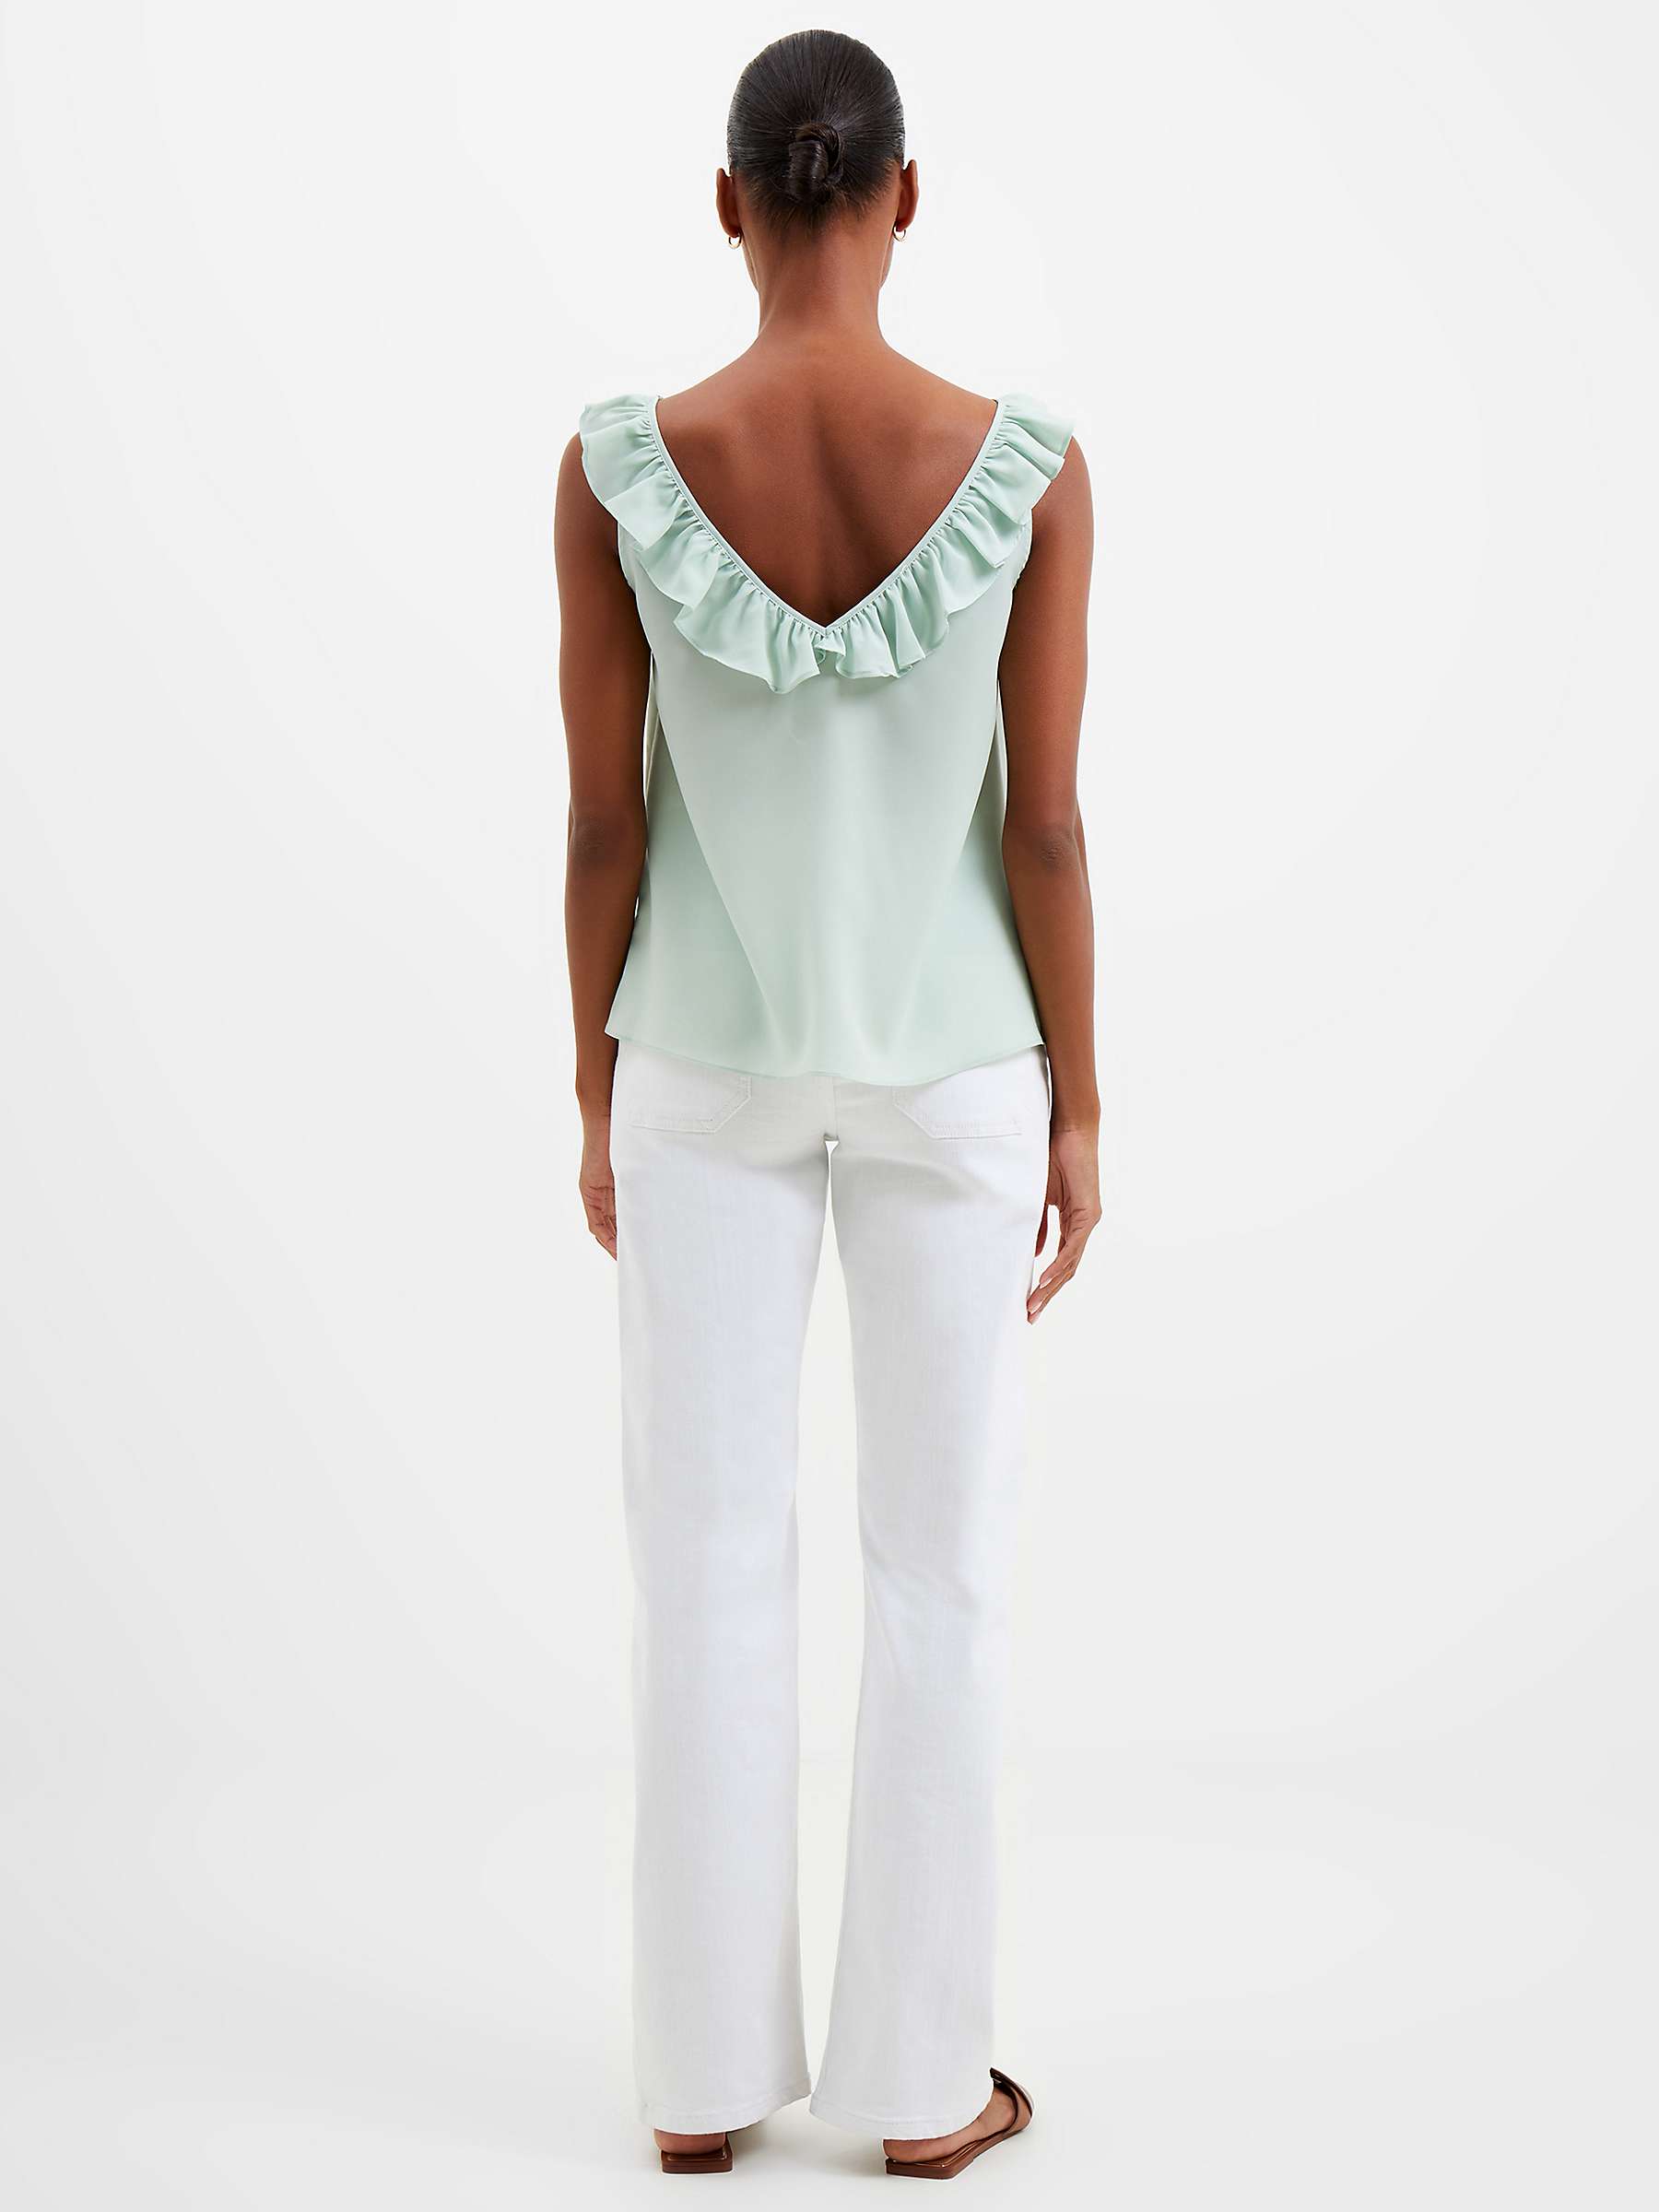 Buy French Connection Recycled Crepe Light Ruffle Cami Online at johnlewis.com